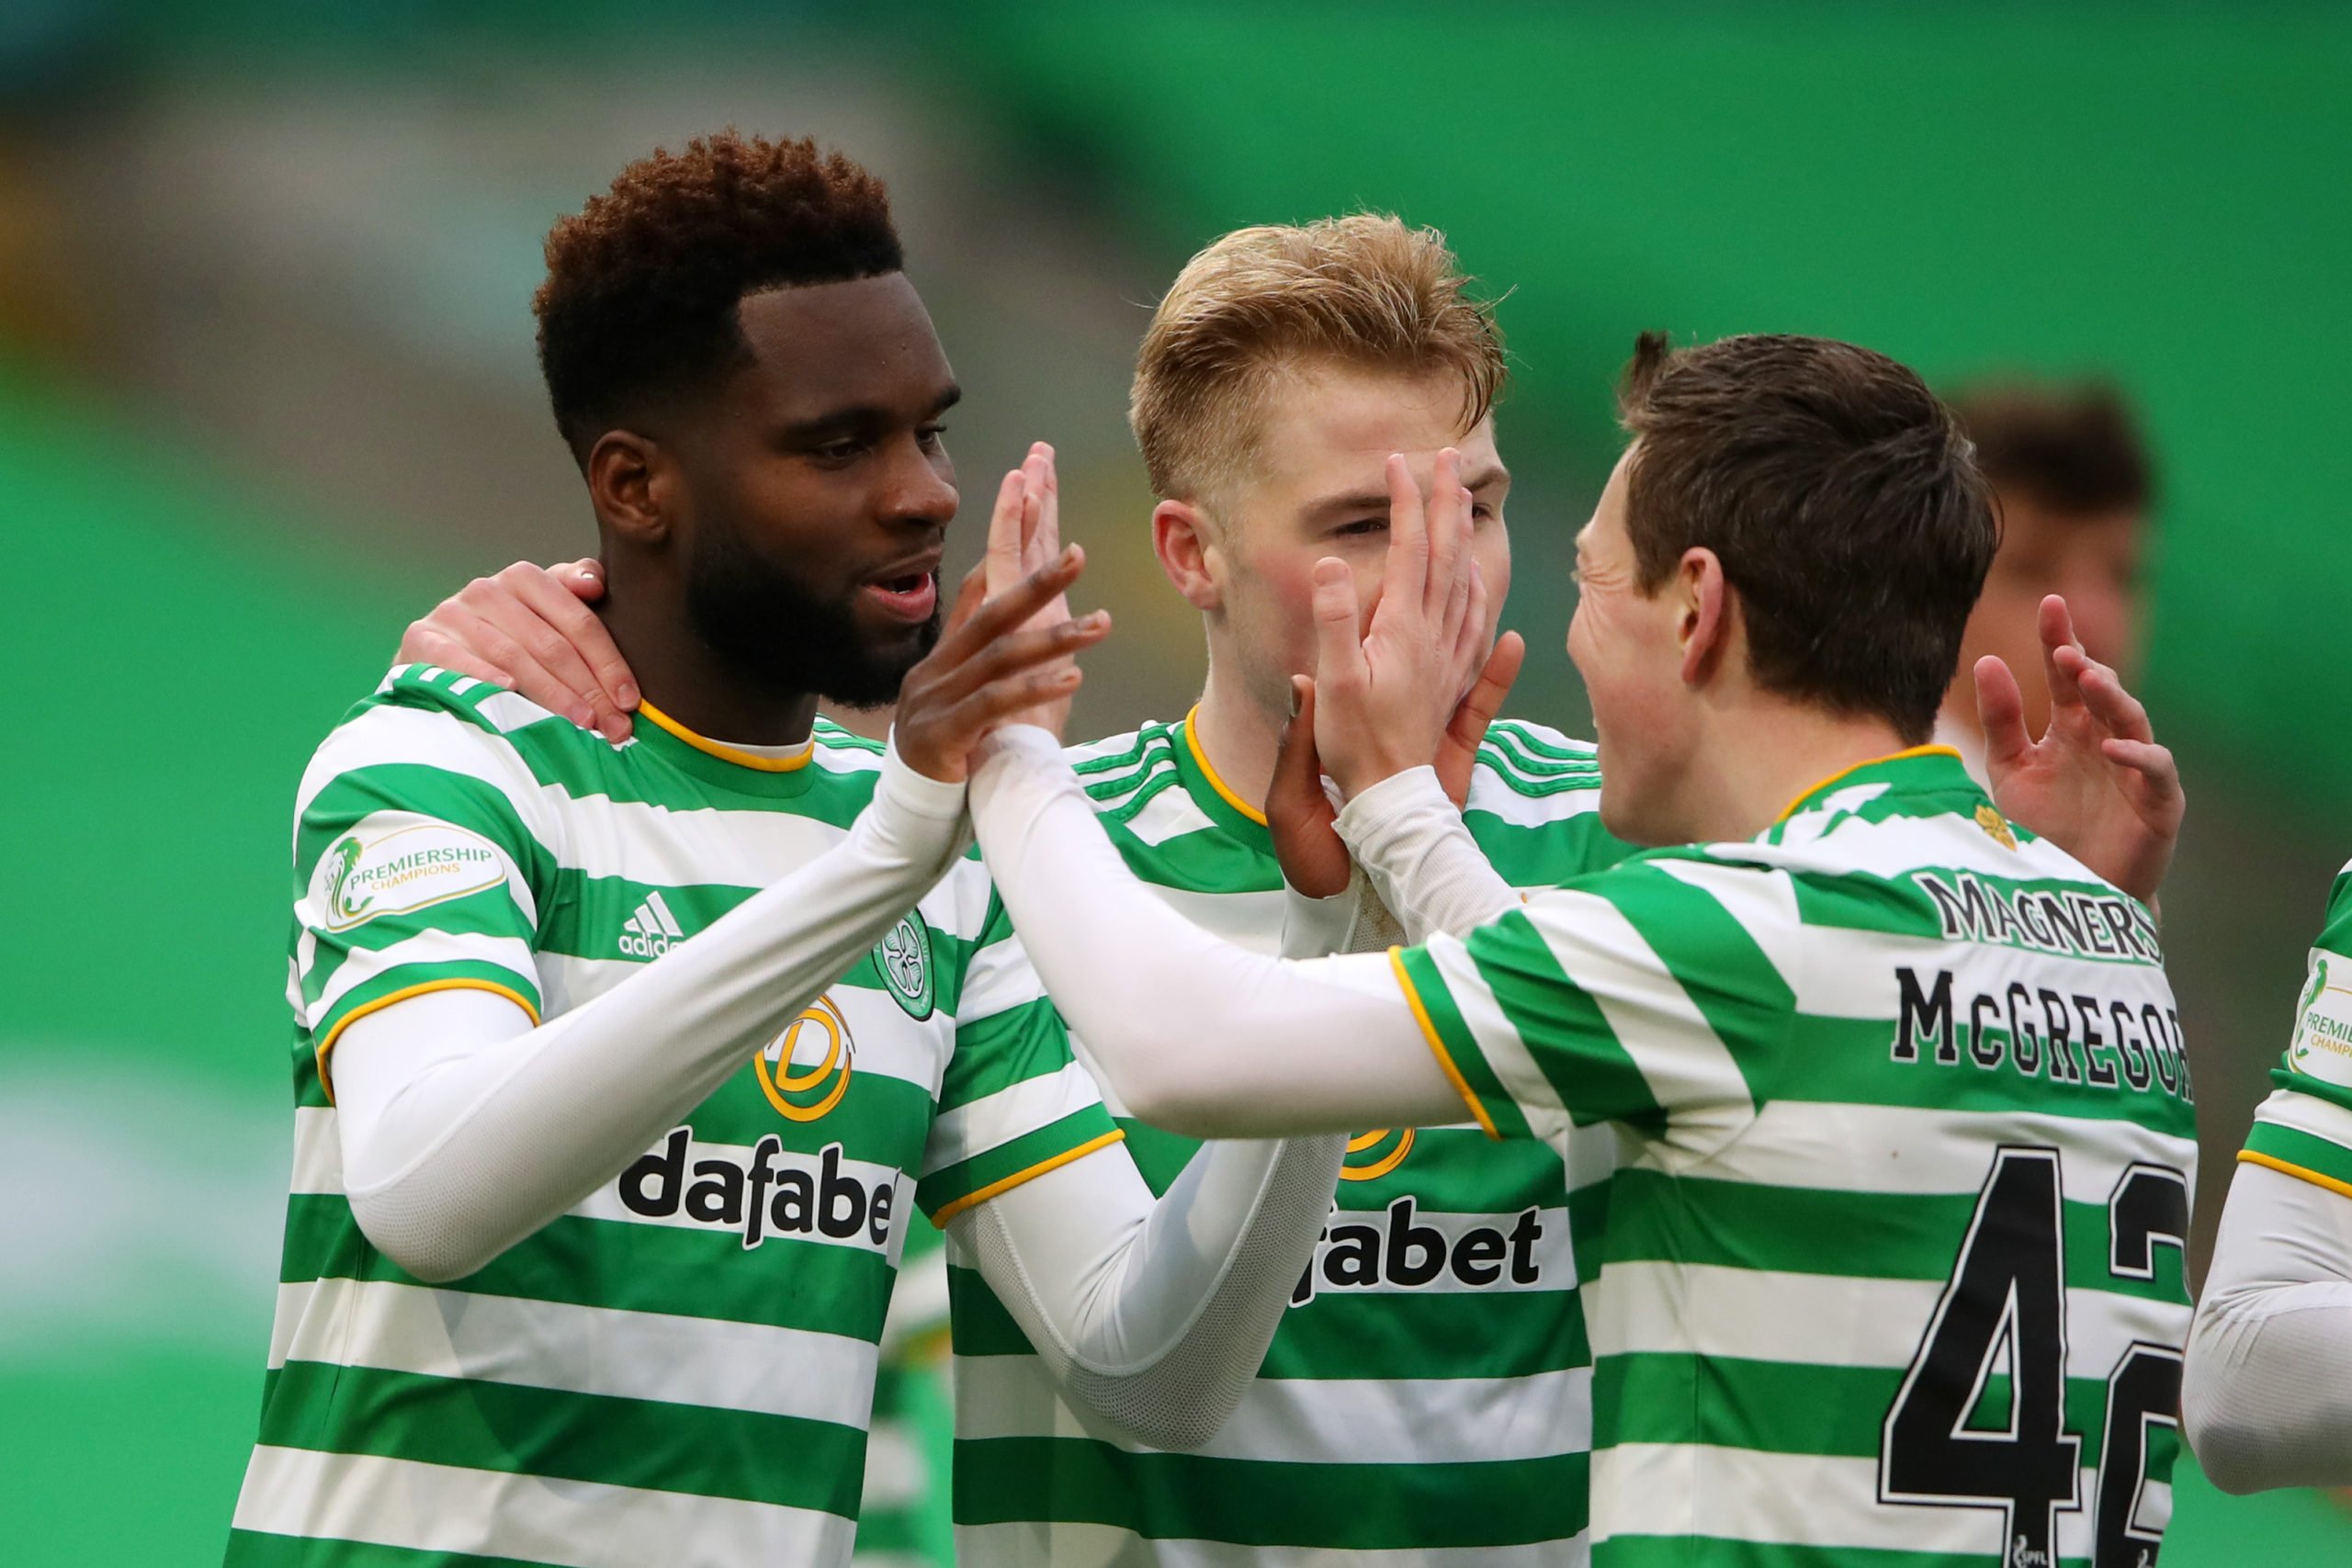 GLASGOW, SCOTLAND - FEBRUARY 06: Odsonne Edouard of Celtic celebrates with teammate Callum McGregor after scoring his team's second goal during the Ladbrokes Scottish Premiership match between Celtic and Motherwell at Celtic Park on February 06, 2021 in Glasgow, Scotland. Sporting stadiums around the UK remain under strict restrictions due to the Coronavirus Pandemic as Government social distancing laws prohibit fans inside venues resulting in games being played behind closed doors. (Photo by Ian MacNicol/Getty Images)